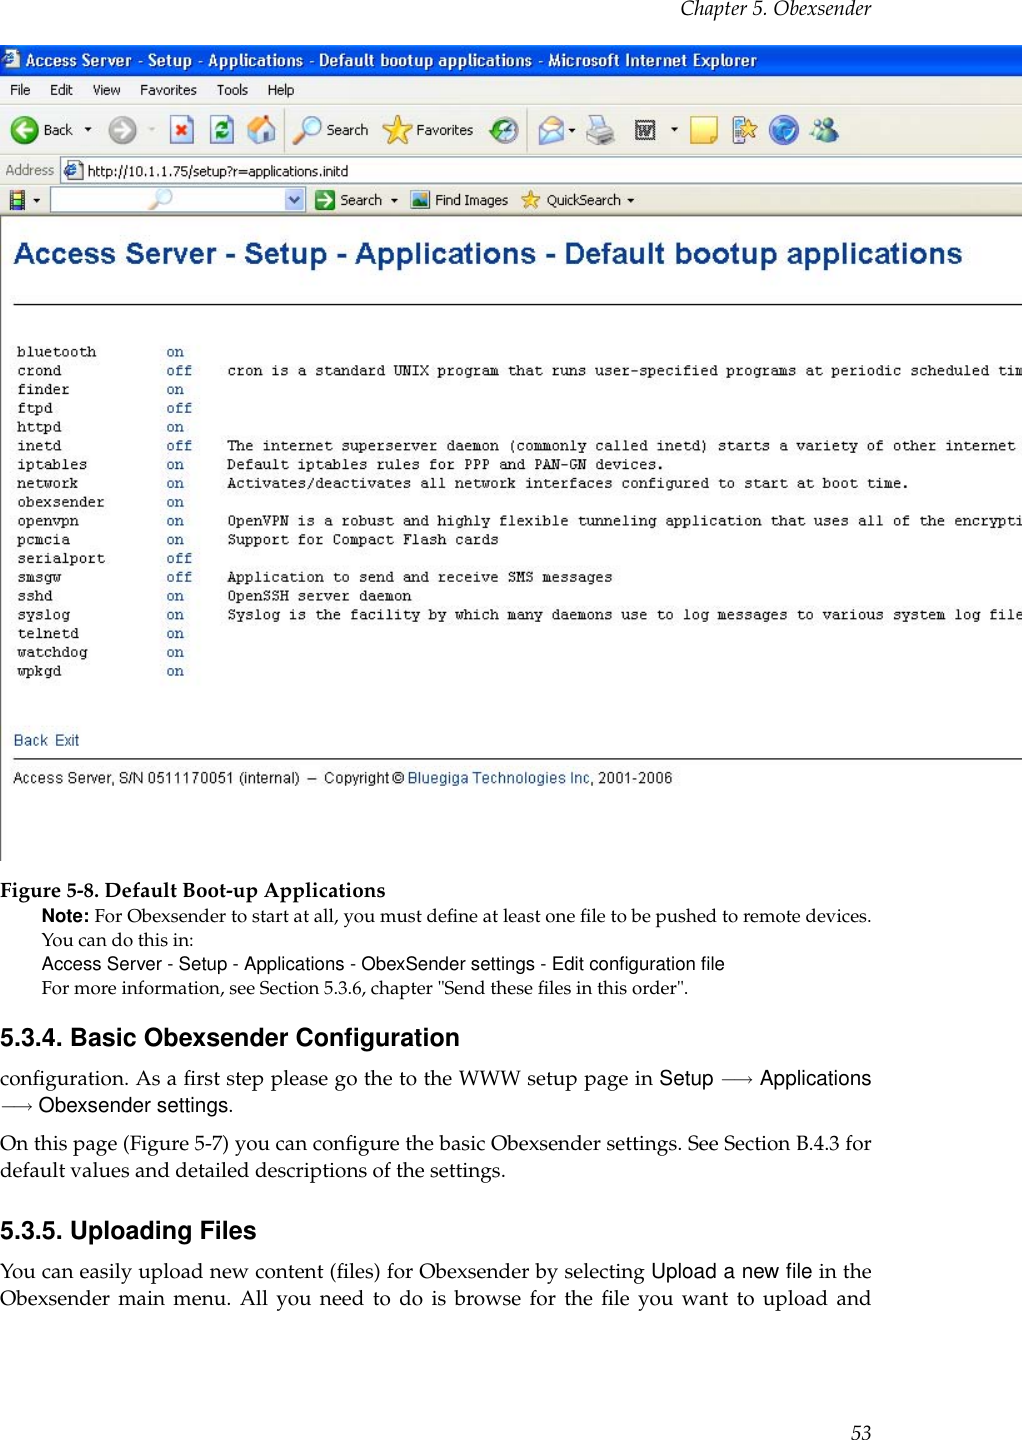 Chapter 5. ObexsenderFigure 5-8. Default Boot-up ApplicationsNote: For Obexsender to start at all, you must deﬁne at least one ﬁle to be pushed to remote devices.You can do this in:Access Server - Setup - Applications - ObexSender settings - Edit conﬁguration ﬁleFor more information, see Section 5.3.6, chapter &quot;Send these ﬁles in this order&quot;.5.3.4. Basic Obexsender Conﬁgurationconﬁguration. As a ﬁrst step please go the to the WWW setup page in Setup −→ Applications−→ Obexsender settings.On this page (Figure 5-7) you can conﬁgure the basic Obexsender settings. See Section B.4.3 fordefault values and detailed descriptions of the settings.5.3.5. Uploading FilesYou can easily upload new content (ﬁles) for Obexsender by selecting Upload a new ﬁle in theObexsender main menu. All you need to do is browse for the ﬁle you want to upload and53